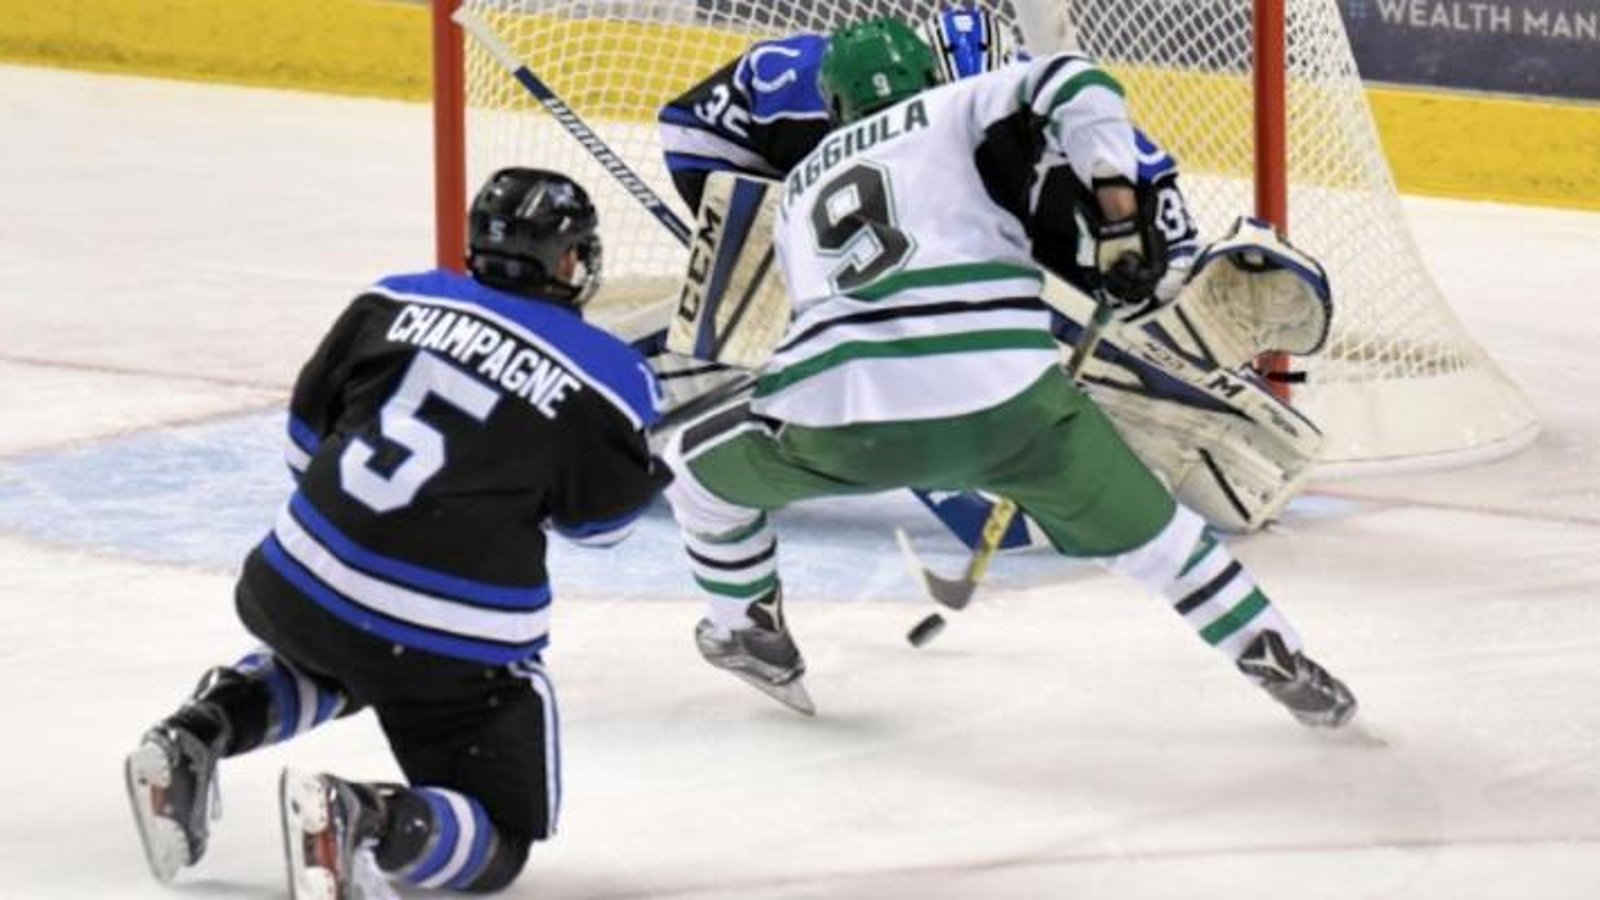 Must See: North Dakota player with goal of the year in the NCAA!